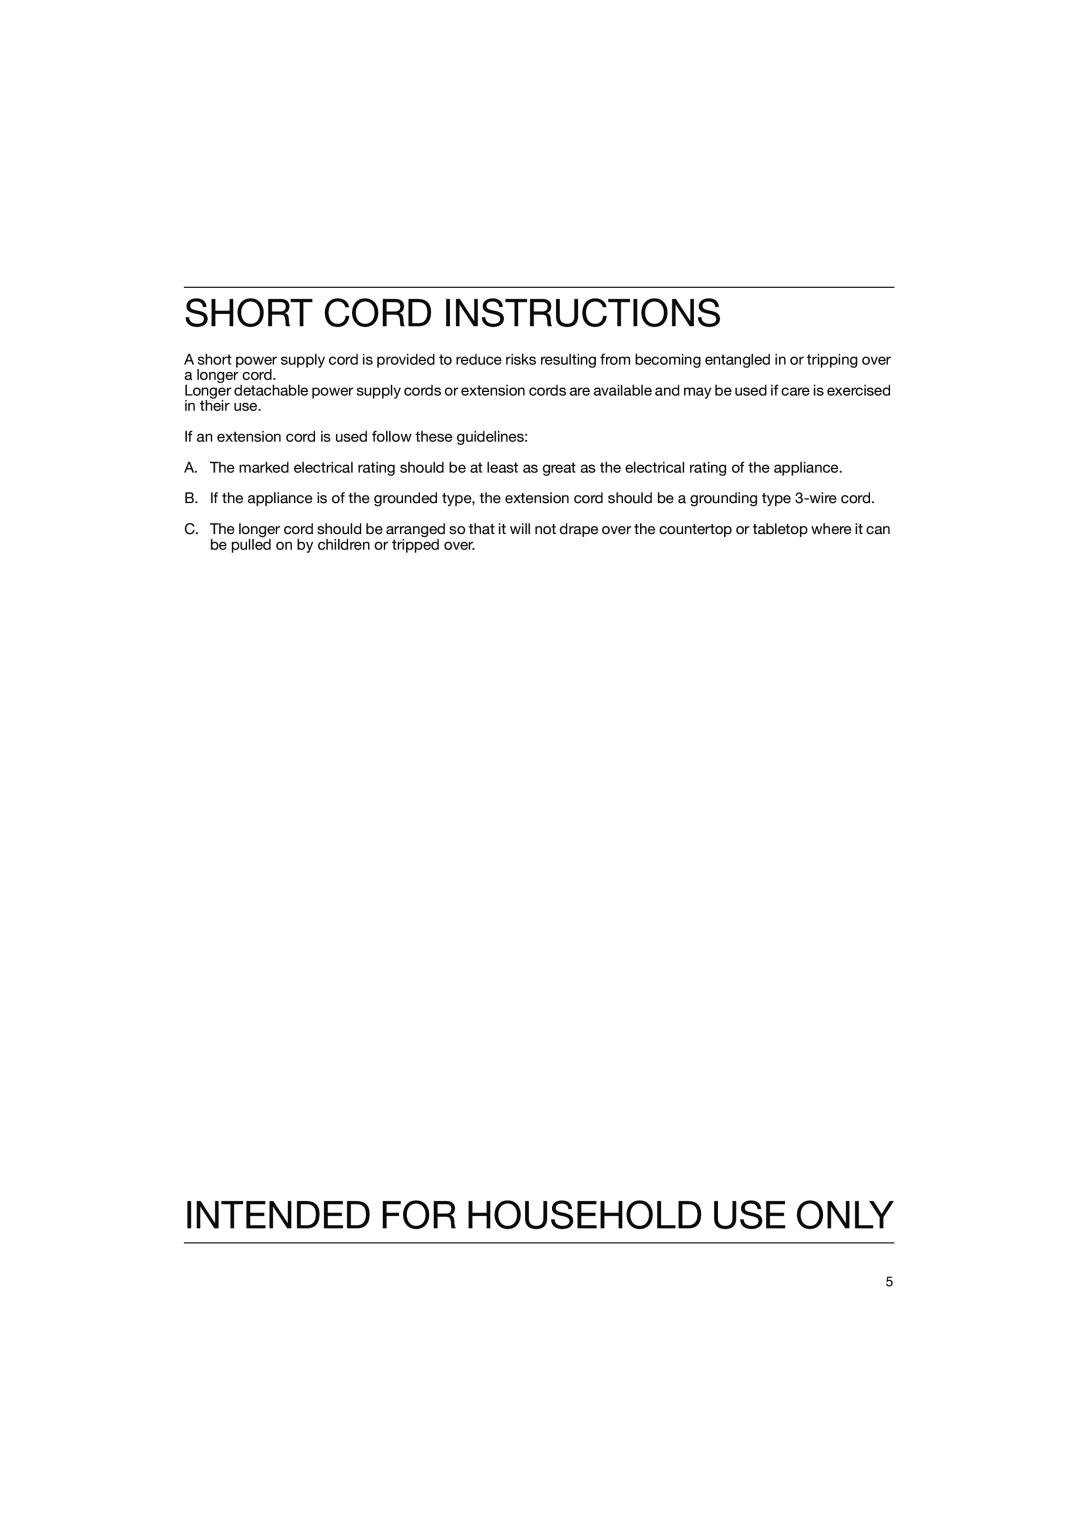 Braun WK 600 manual Short Cord Instructions, Intended For Household Use Only 